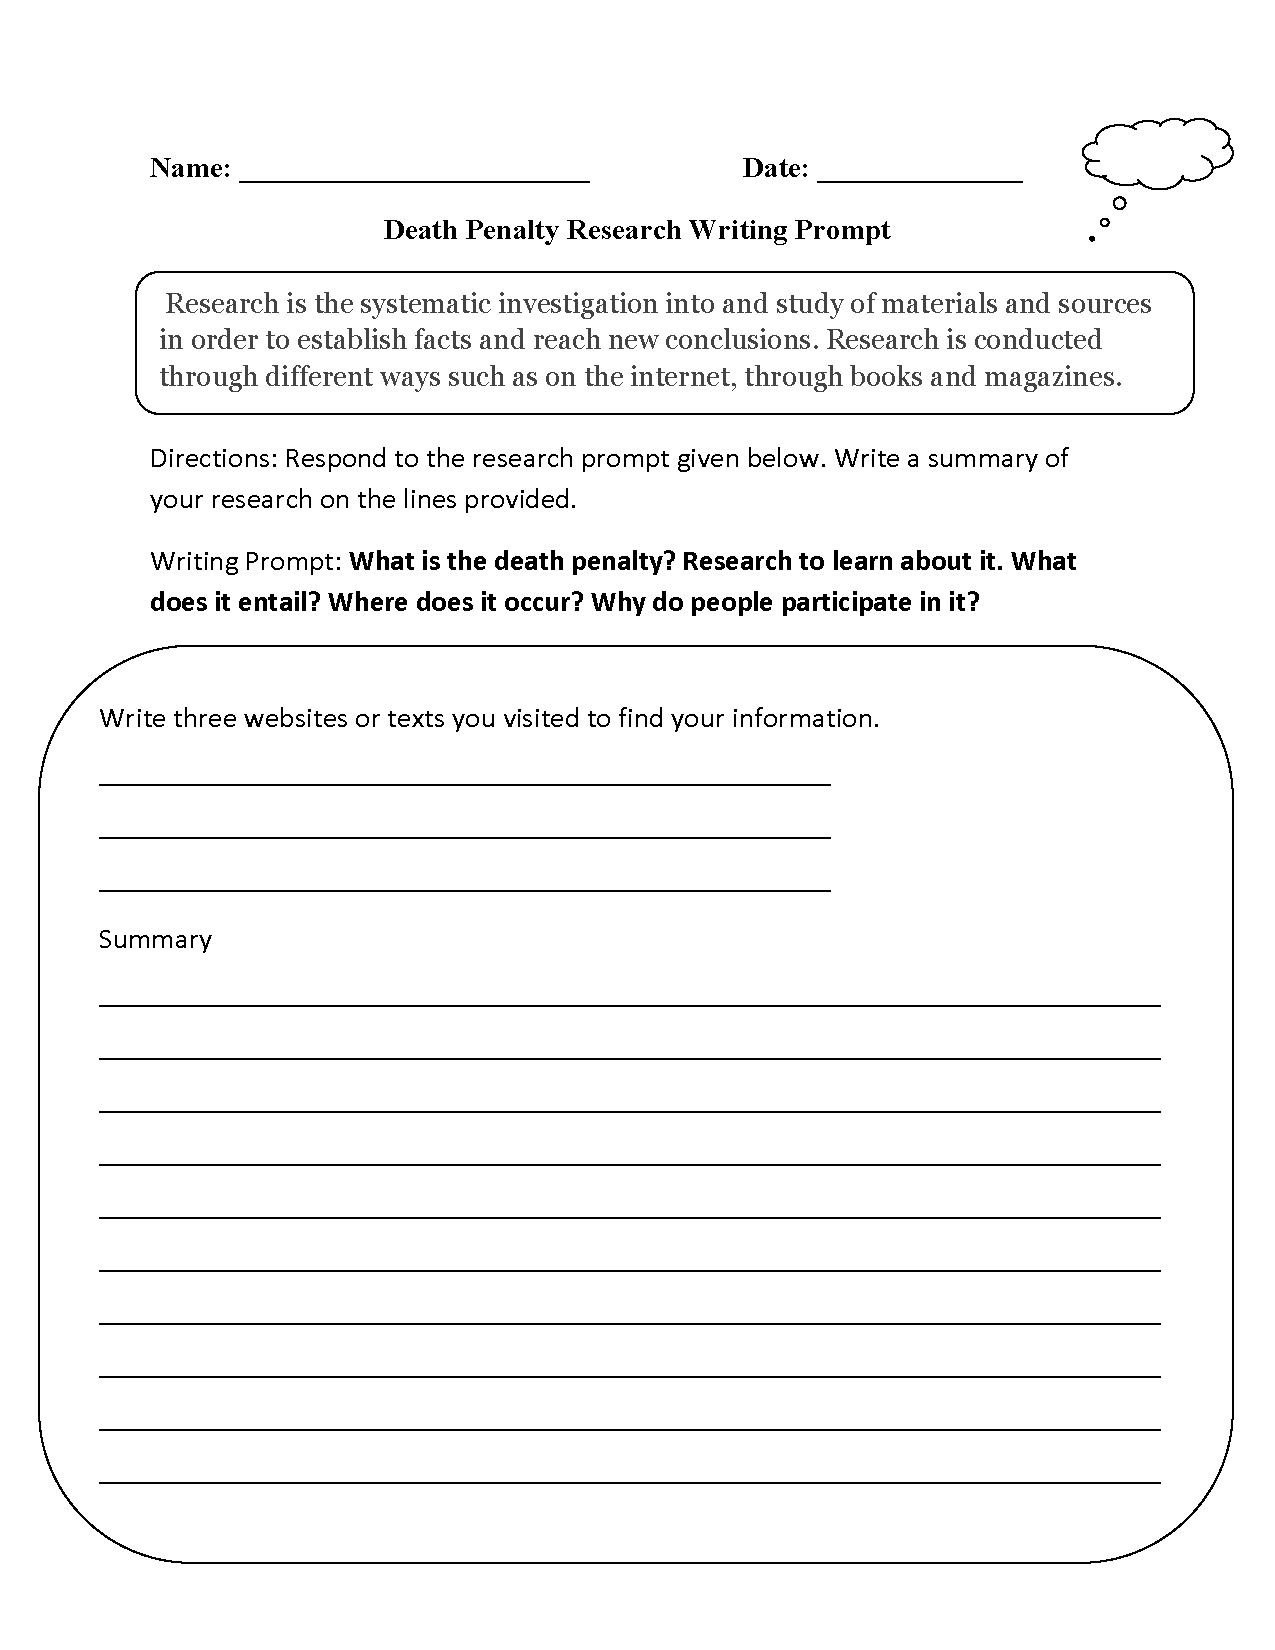 Death Penalty Research Writing Prompts Worksheet